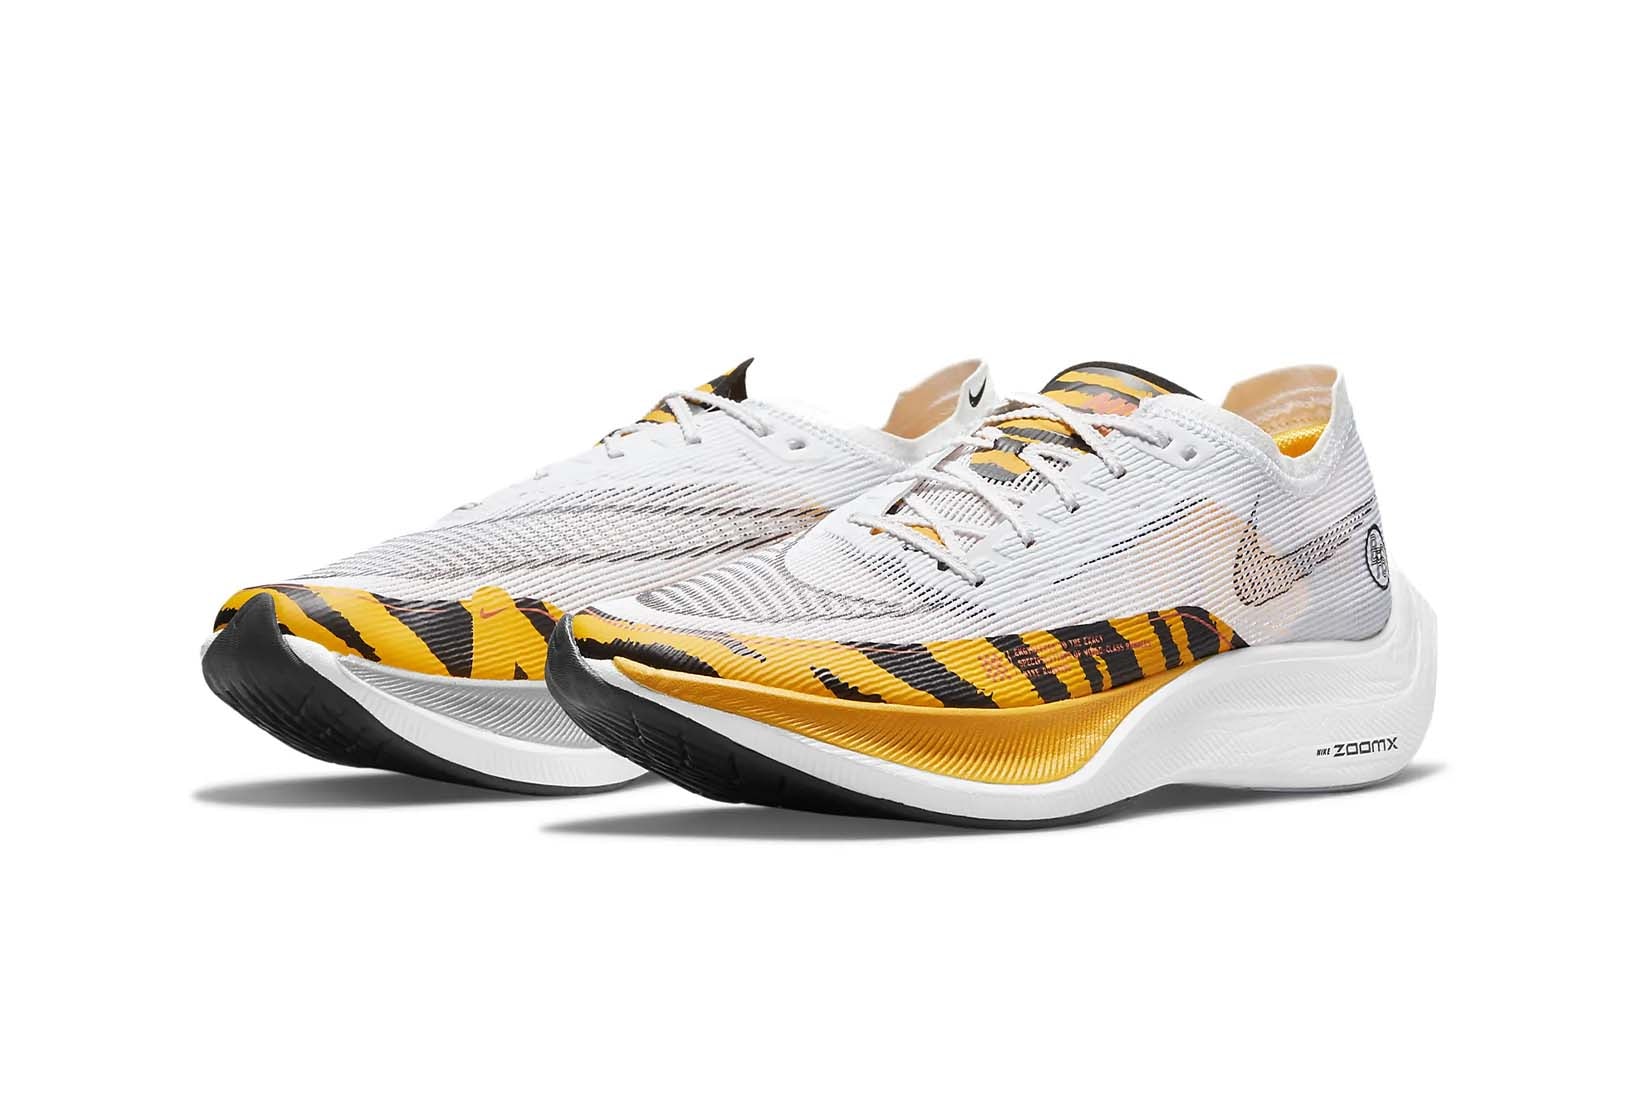 Nike ZoomX Vaporfly Next% 2 Tiger Print Price Release Date